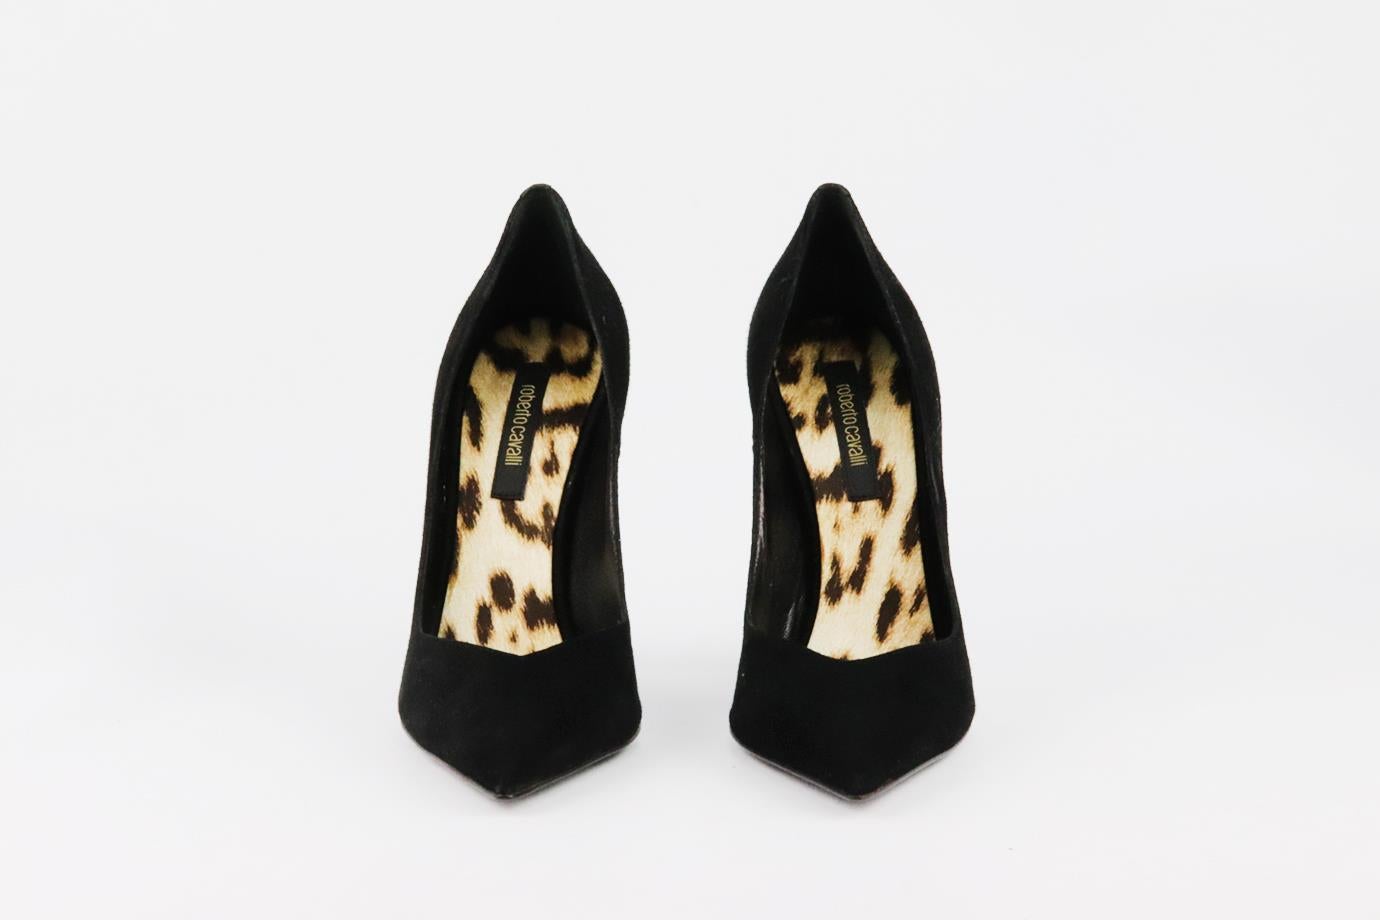 These pumps by Roberto Cavalli are a classic style that will never date, made in Italy from black suede, they have sharp pointed toes and striking 89 mm heels to take you from morning meetings to dinner with friends. Heel measures approximately 89